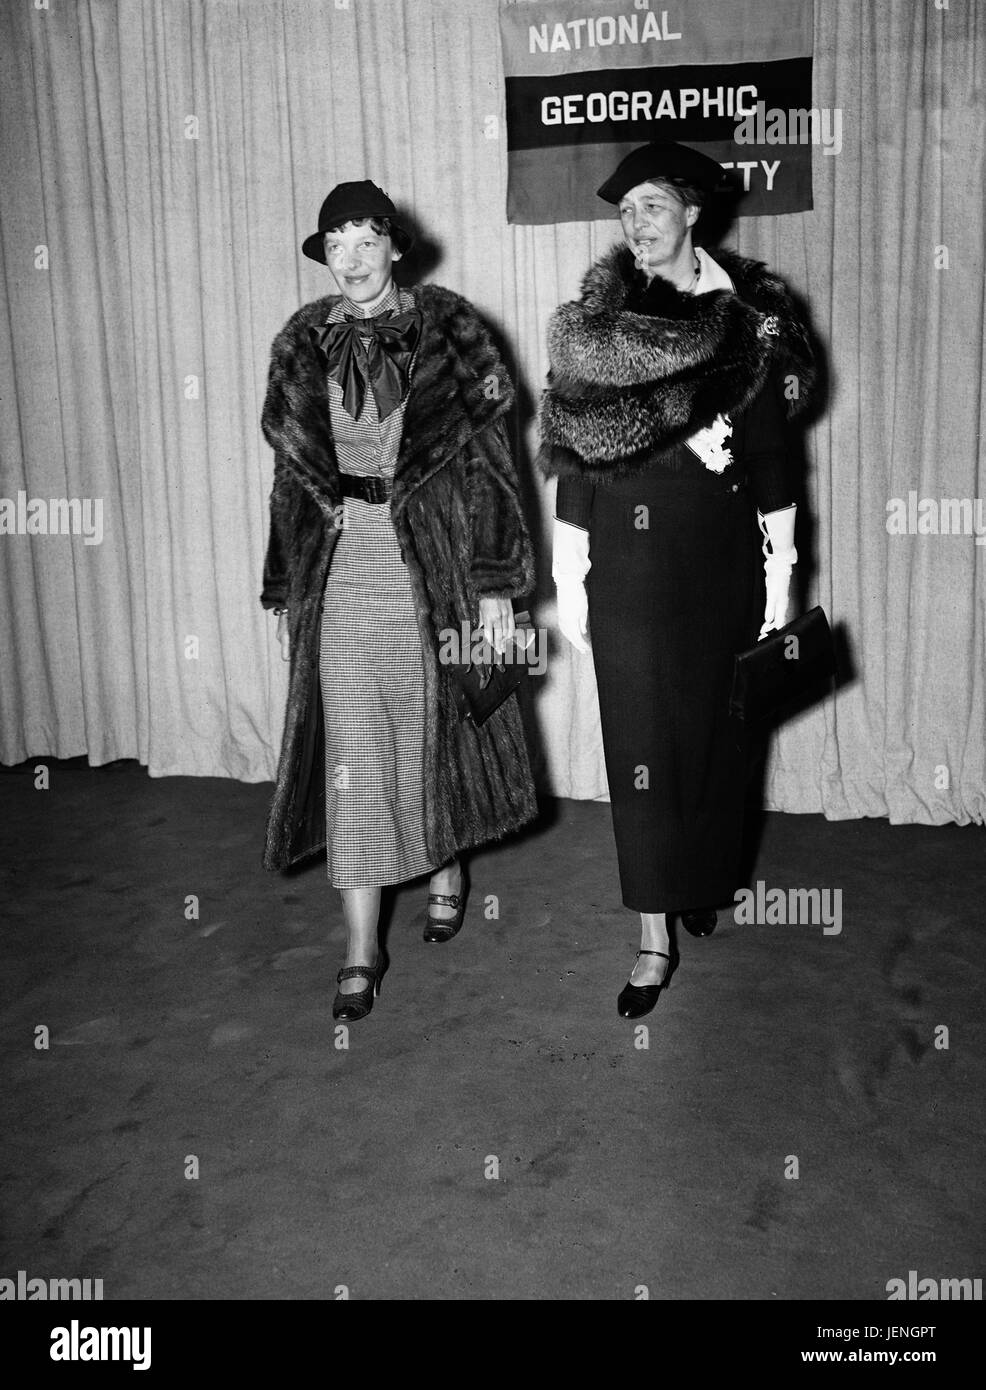 Amelia Earhart and First Lady Eleanor Roosevelt, Portrait Attending National Geographic Society Event, Harris & Ewing, 1935 Stock Photo